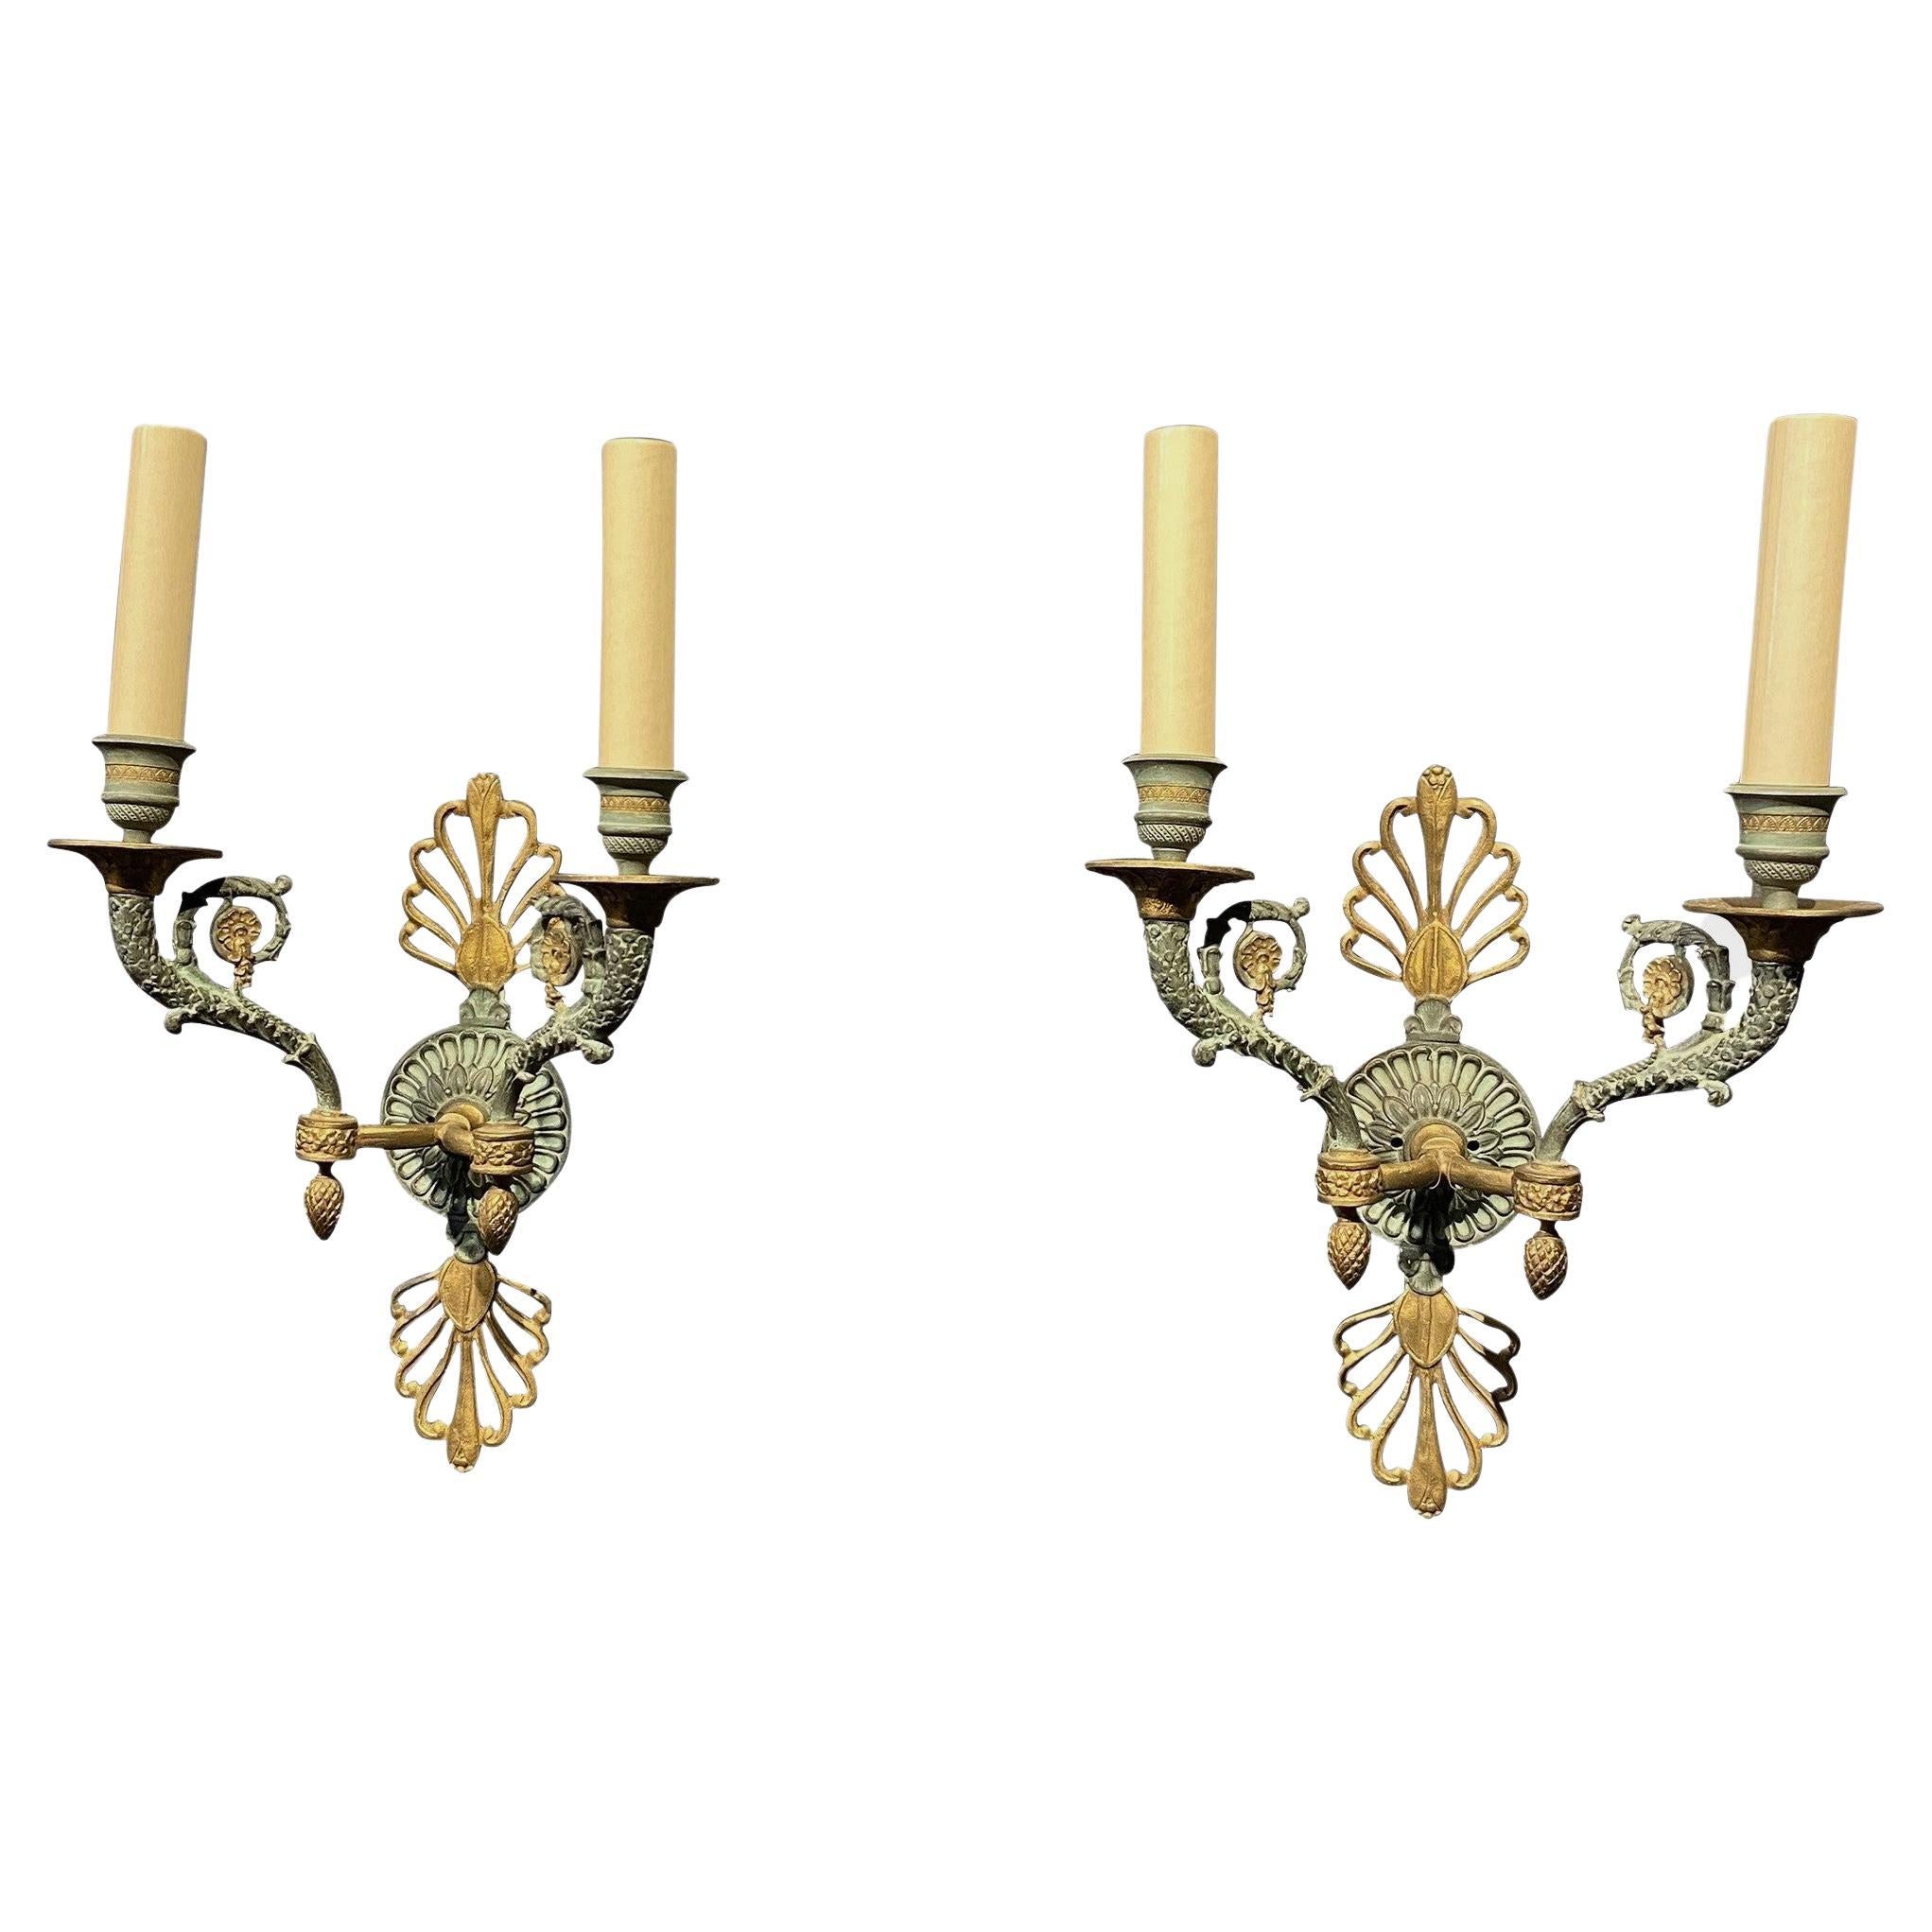 19th Century French Empire Green Patinated Sconces